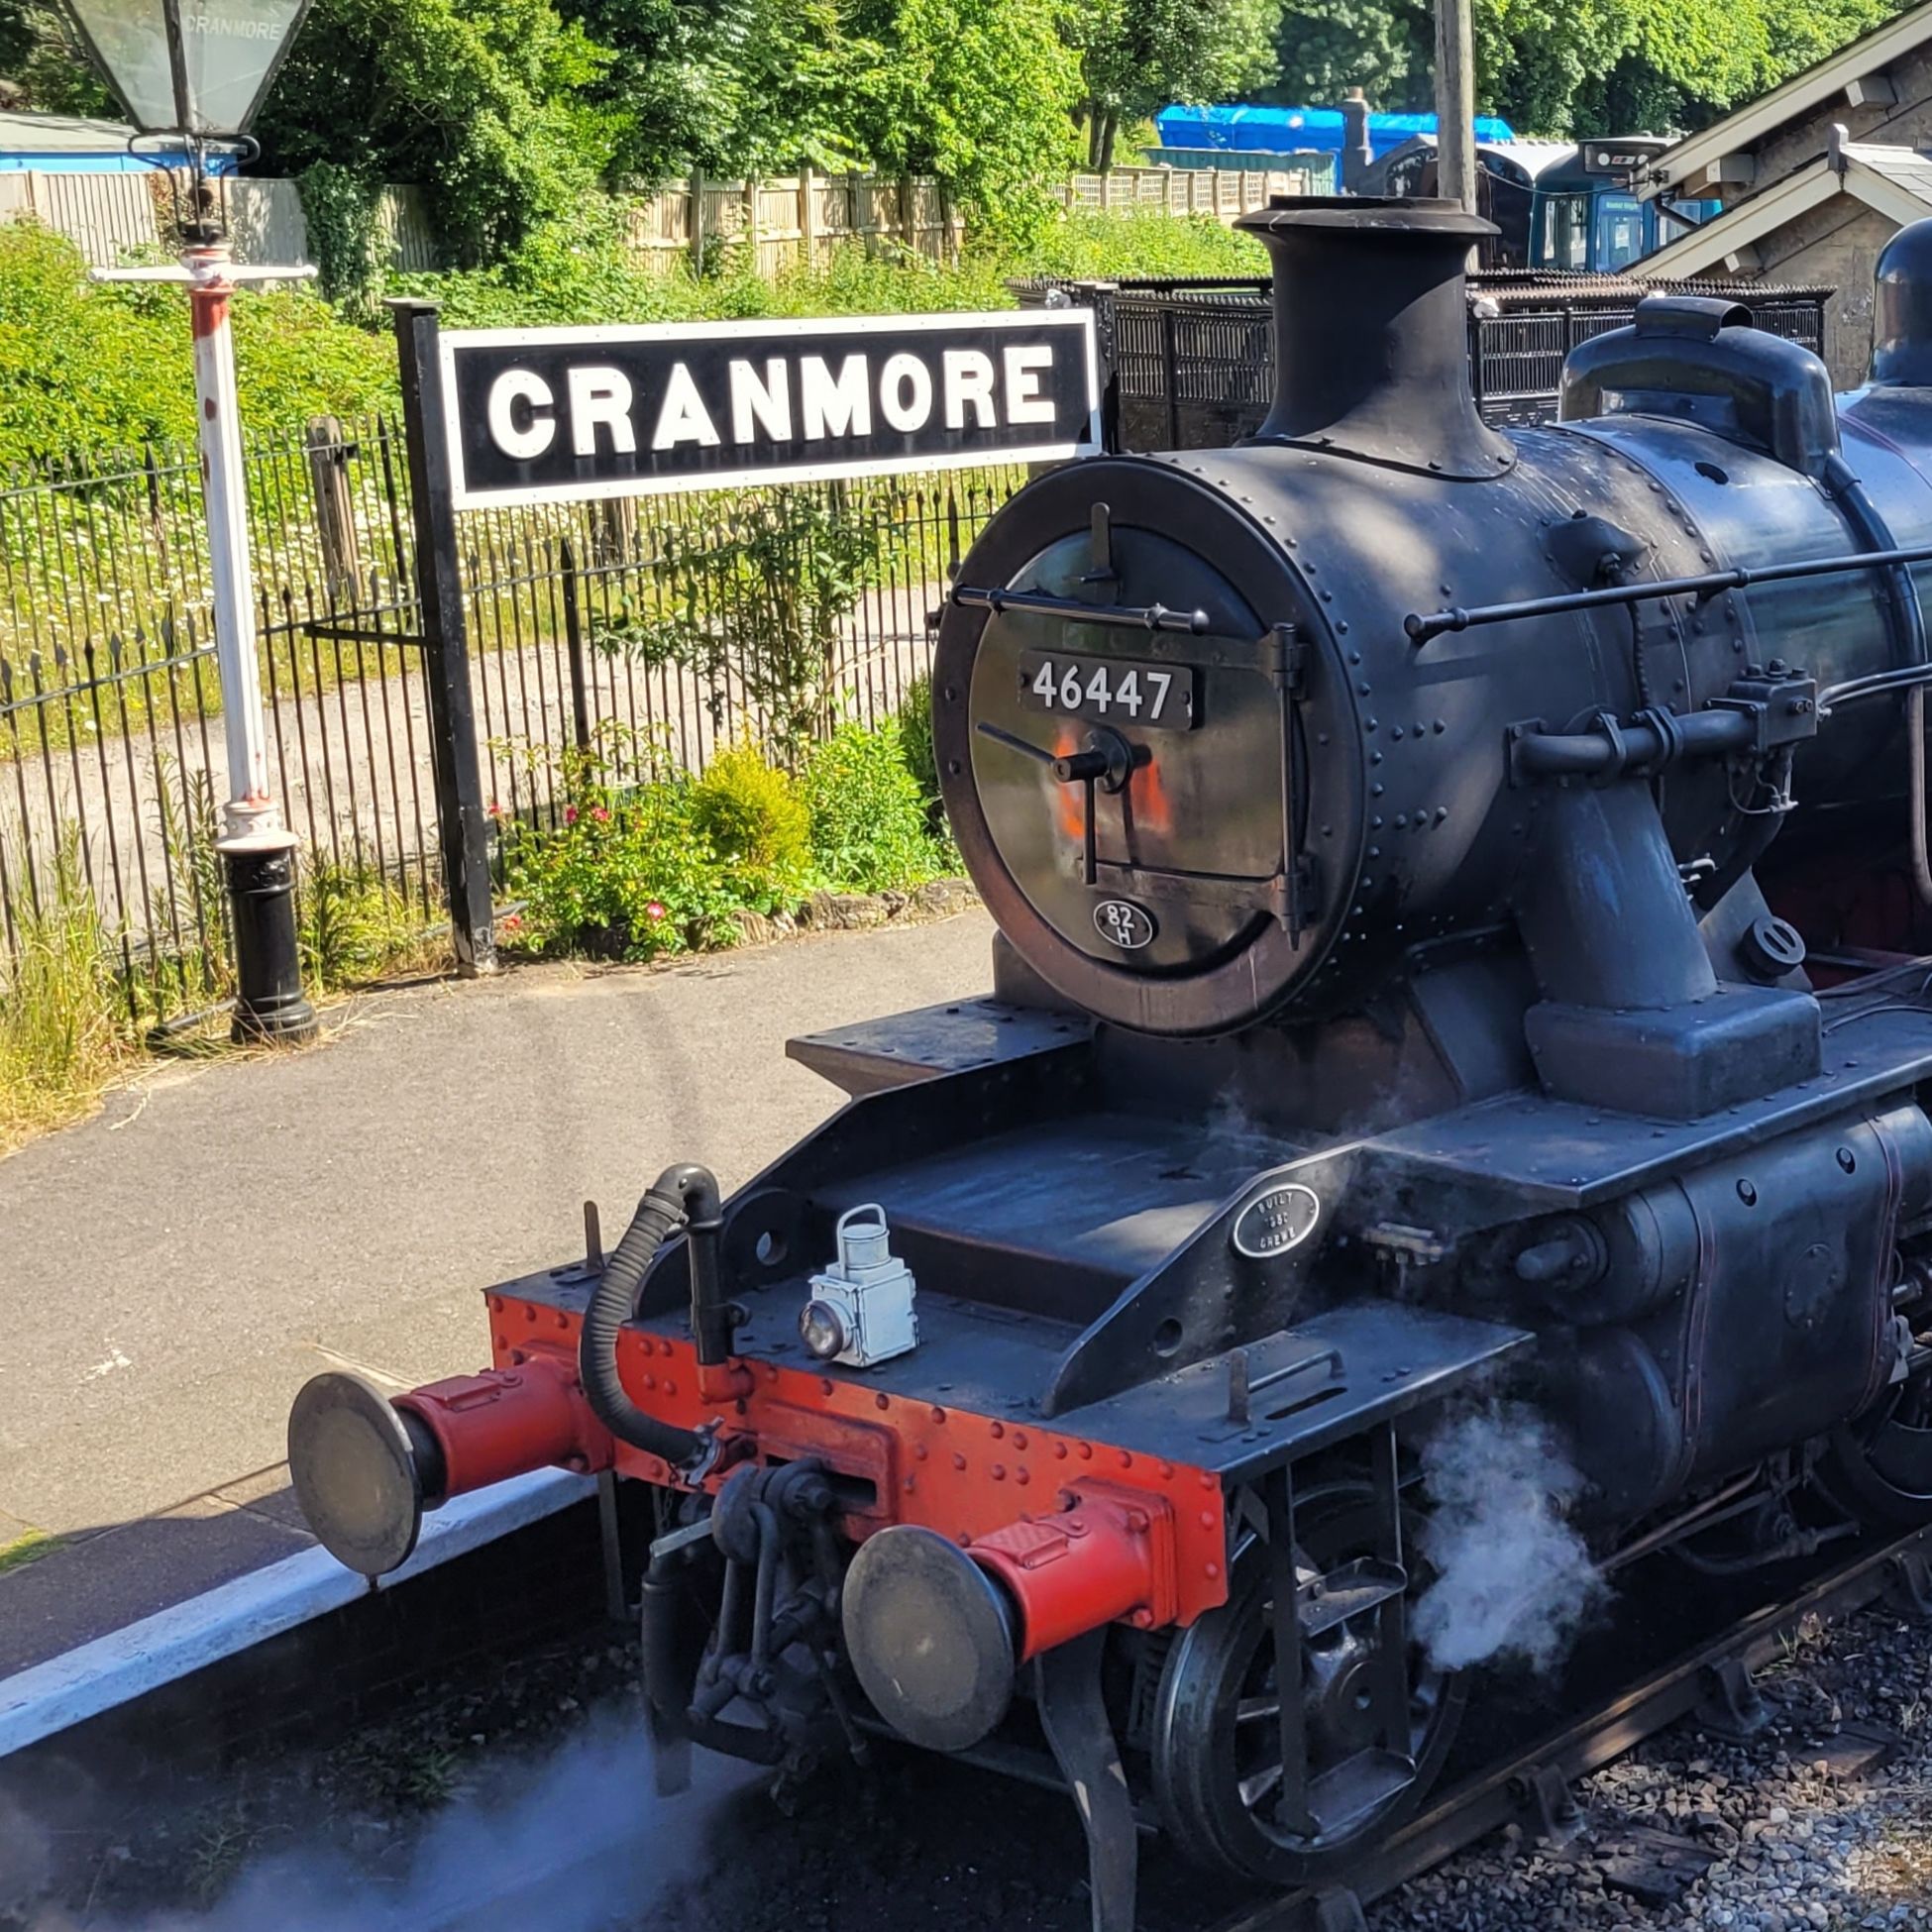 46447 and Cranmore Sign